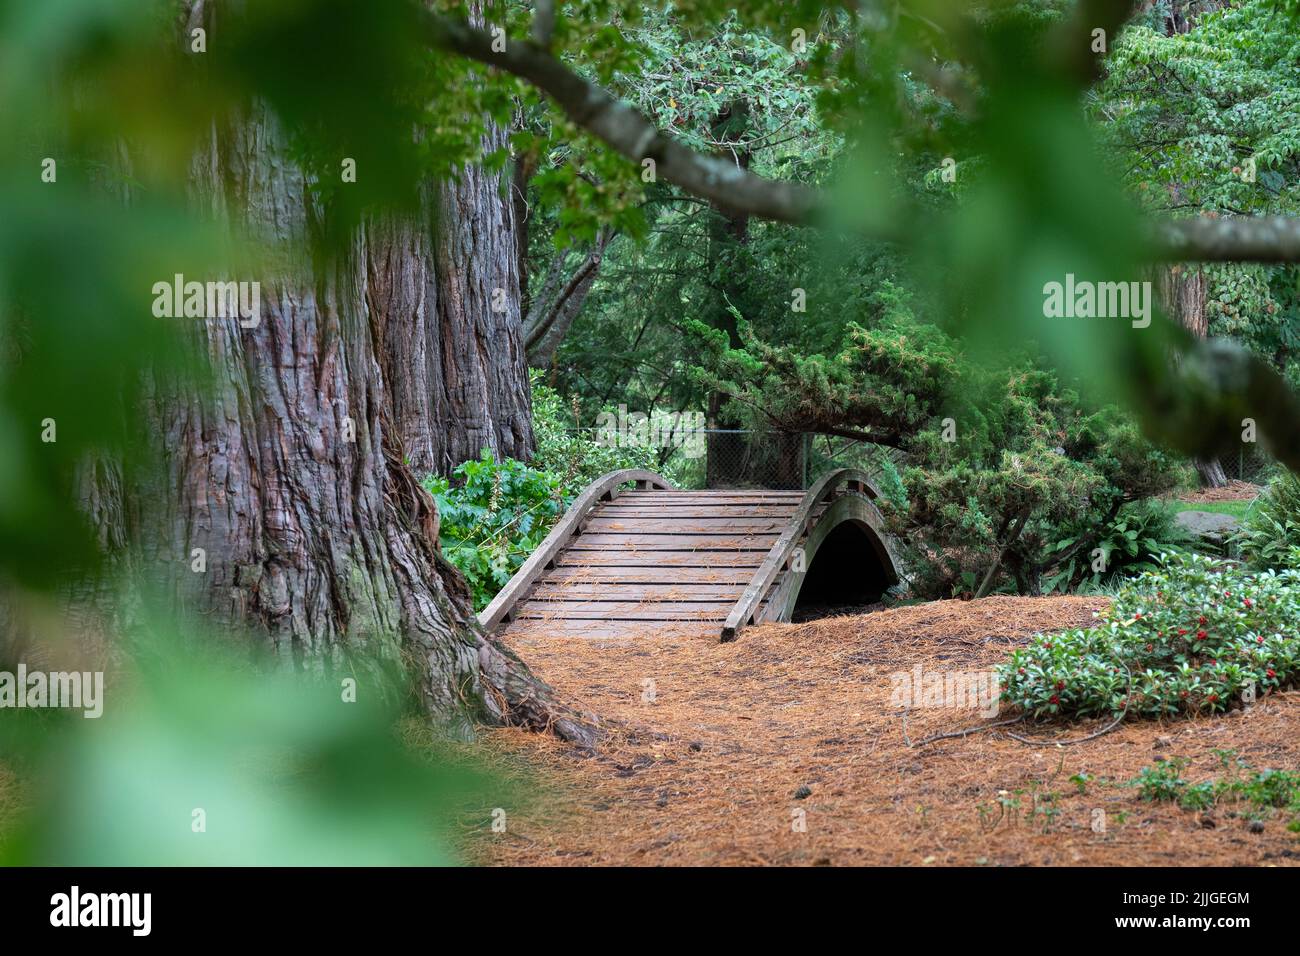 View of Curved Wooden Bridge Through the Leaves in Botanical Garden Stock Photo